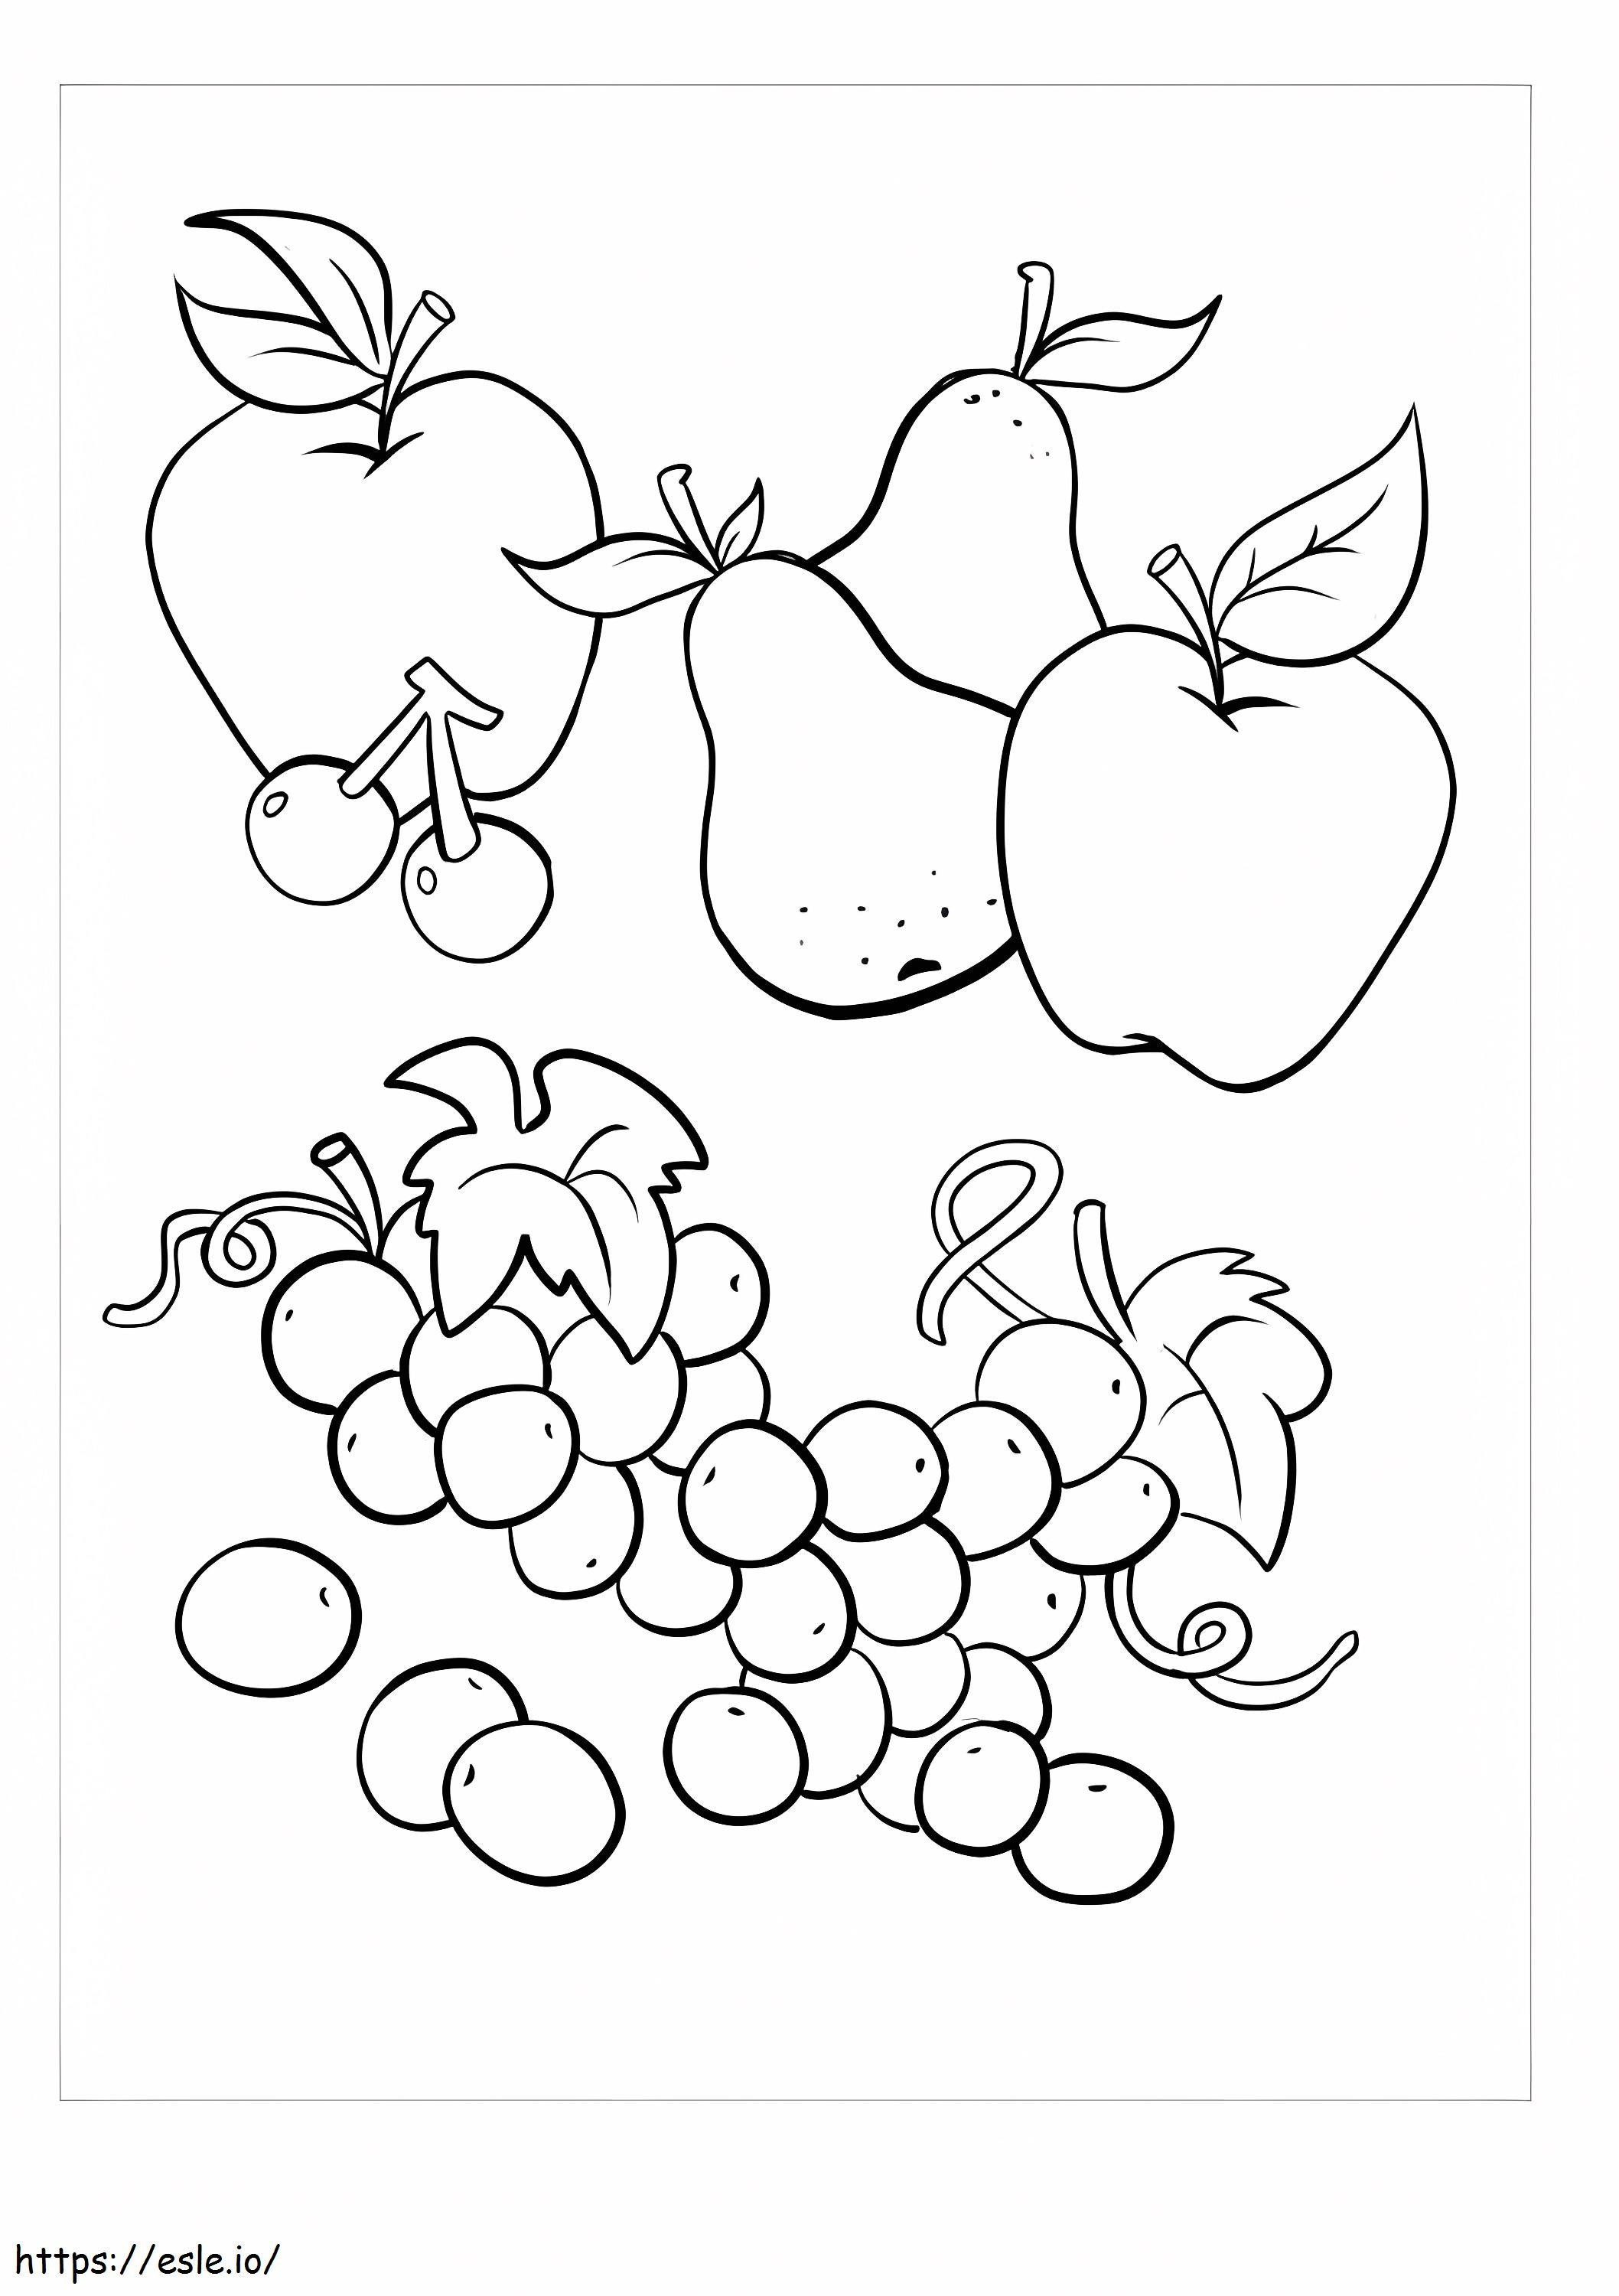 Awesome Fruits coloring page